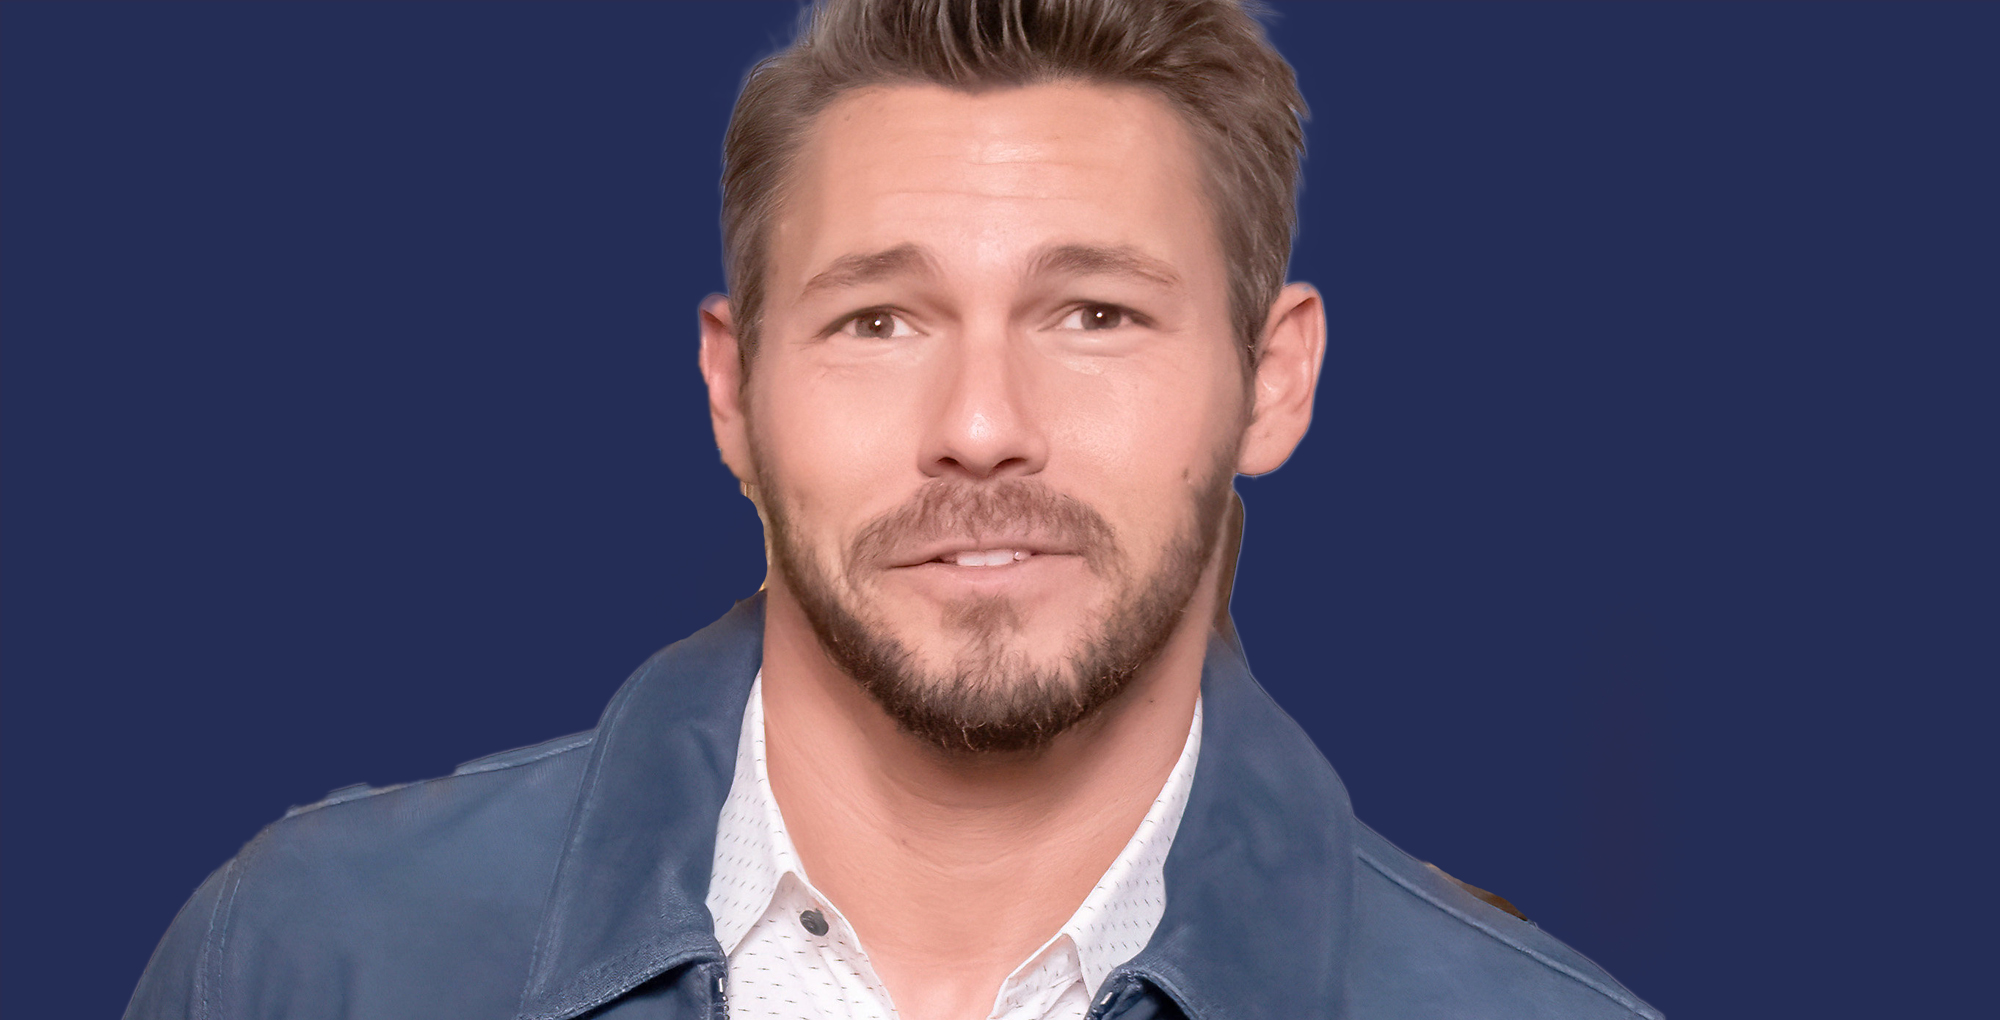 scott clifton of the bold and the beautiful against a blue background.